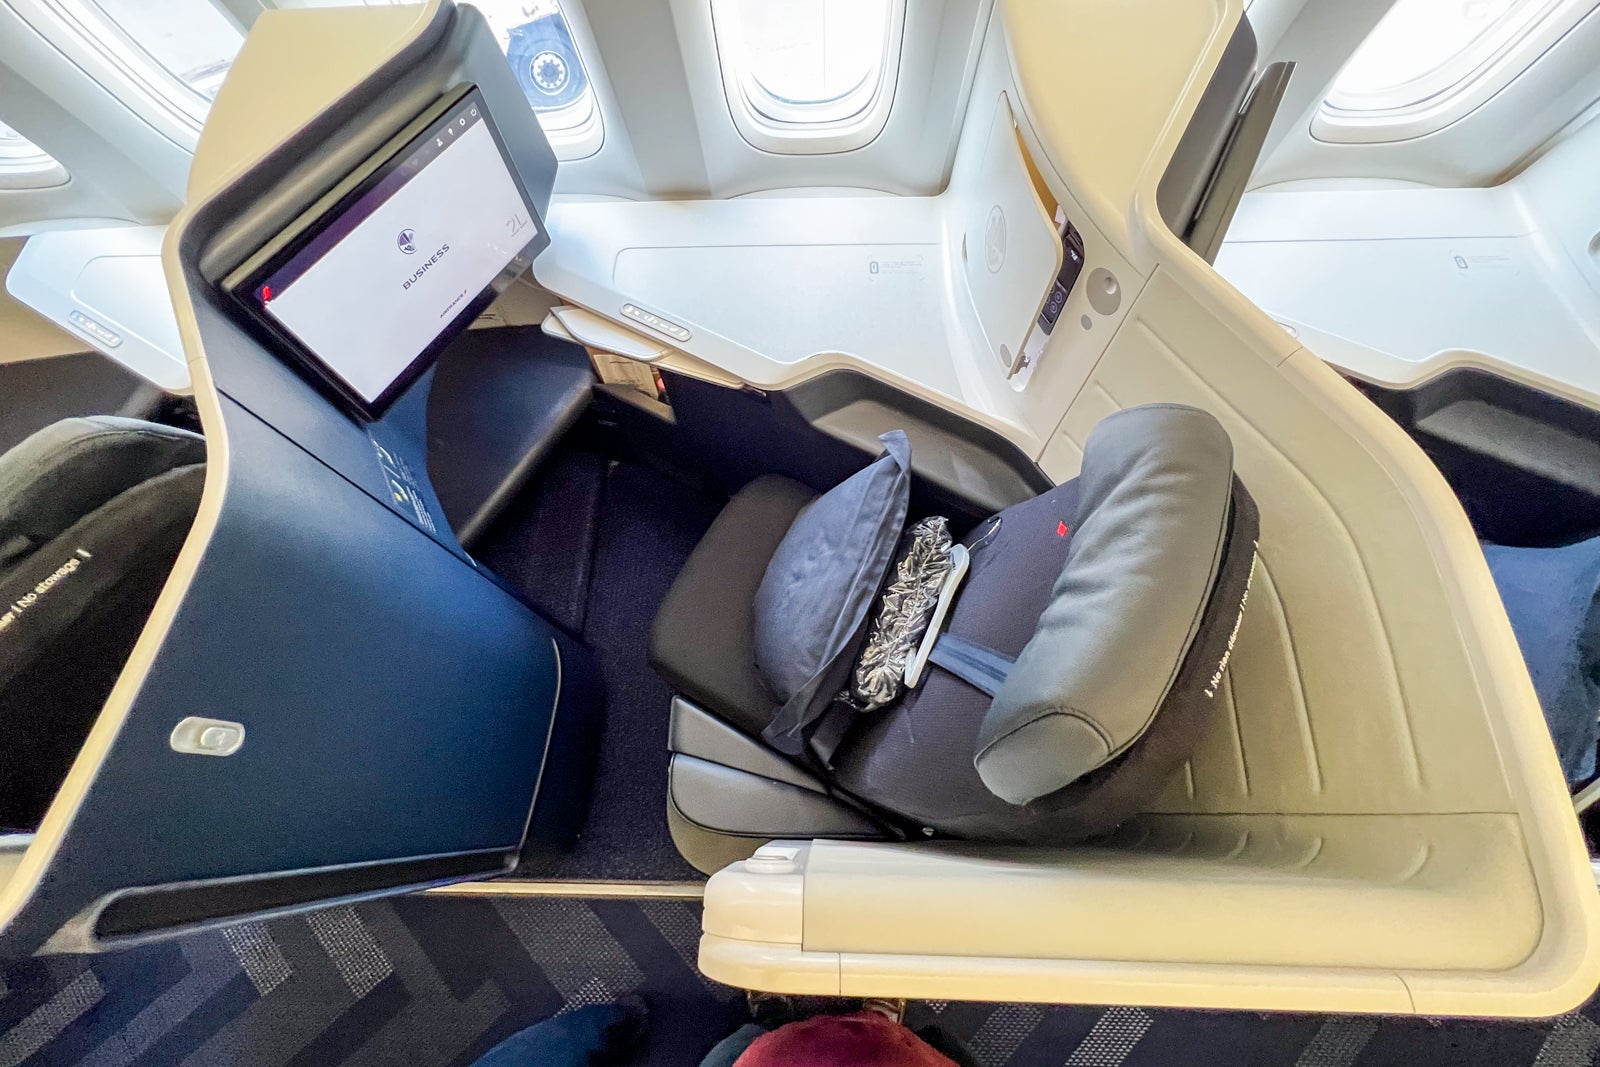 I Flew in Air France's Brand New Business-Class Suite—Here's What